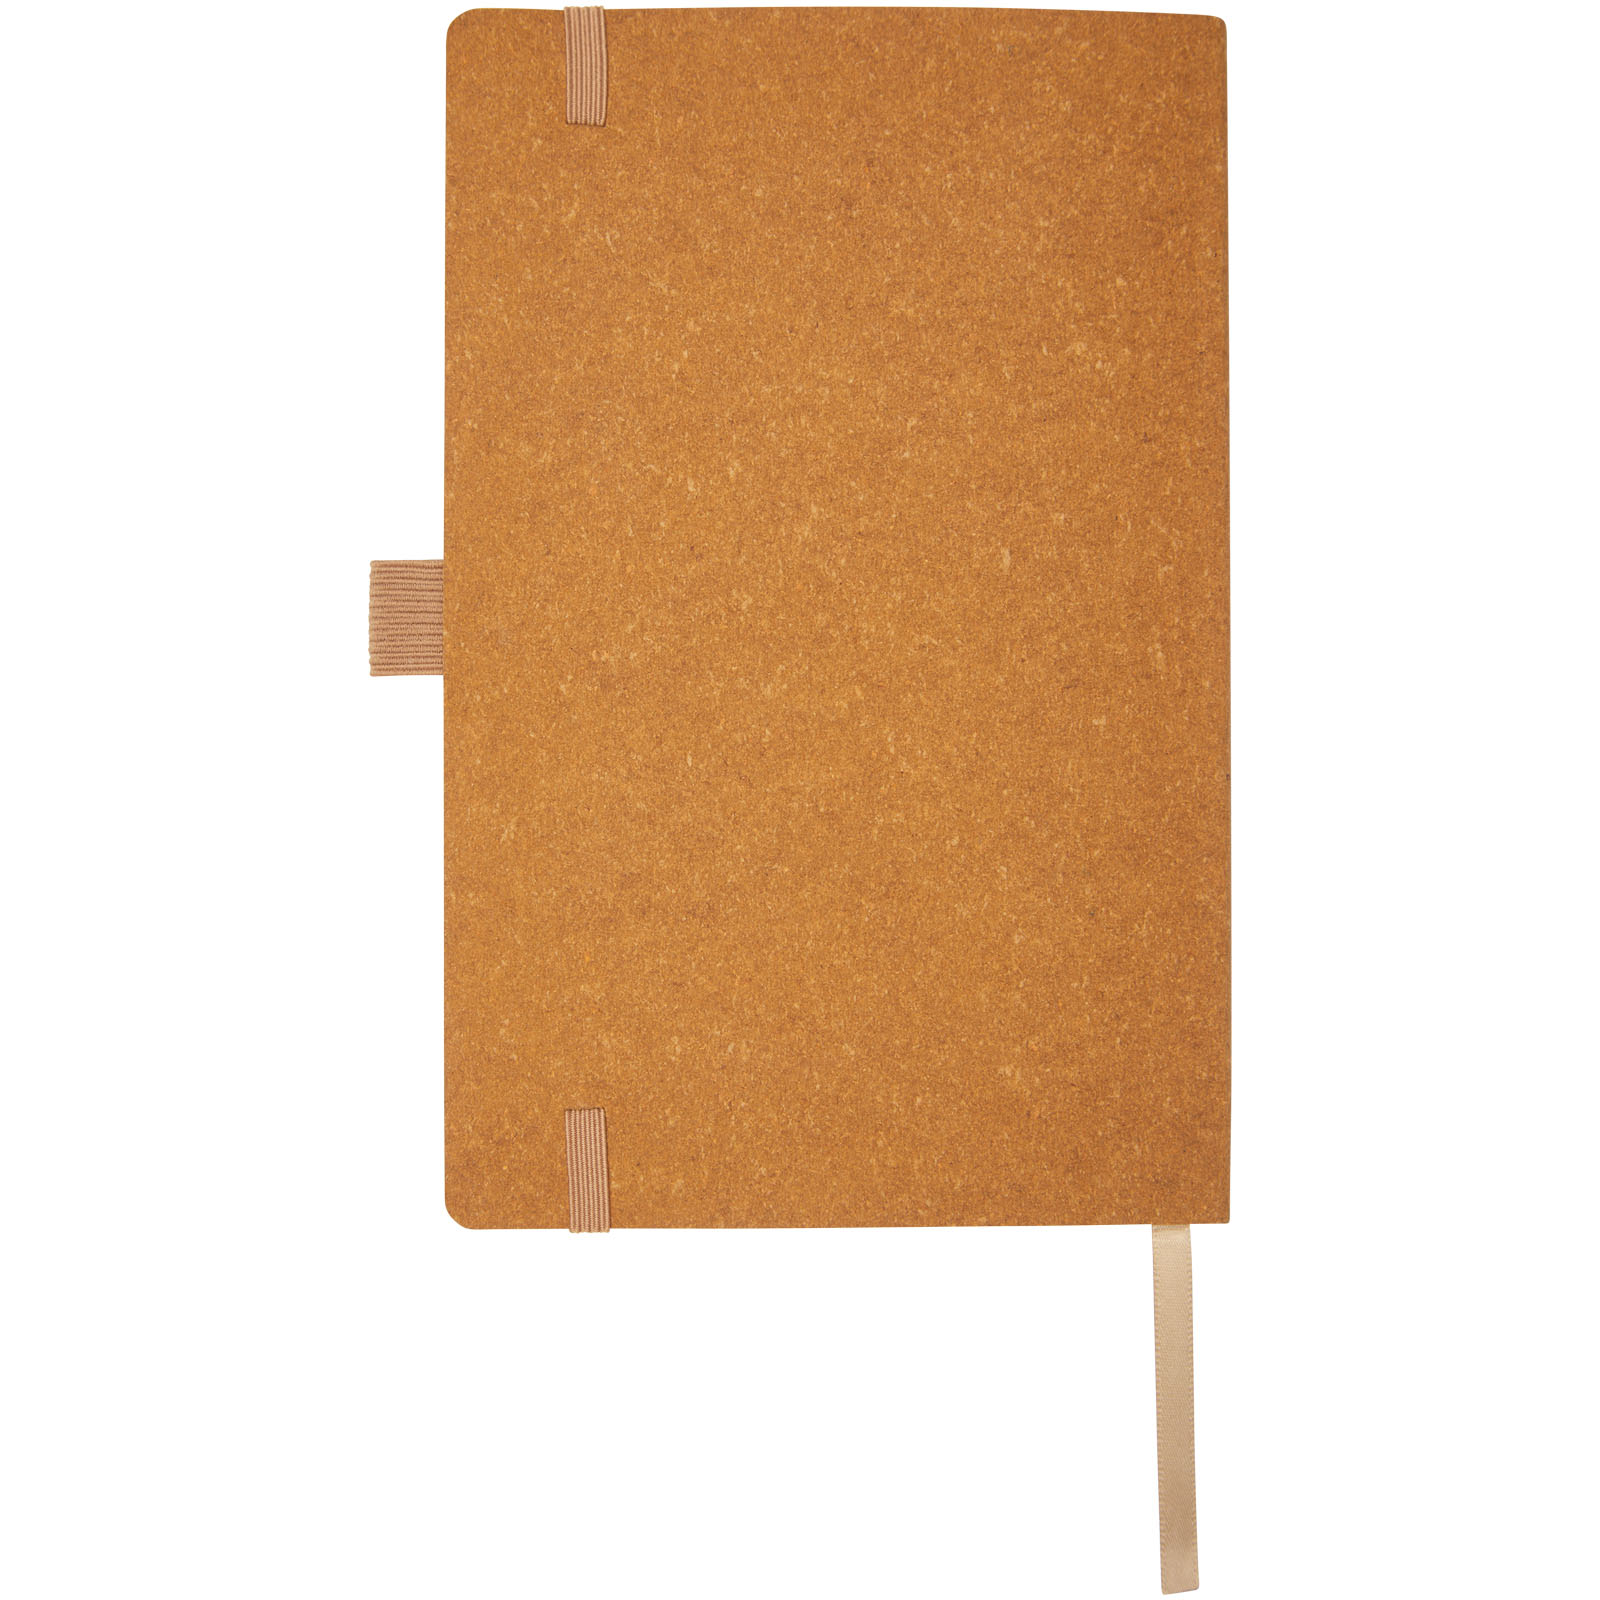 Advertising Soft cover notebooks - Kilau recycled leather notebook  - 2